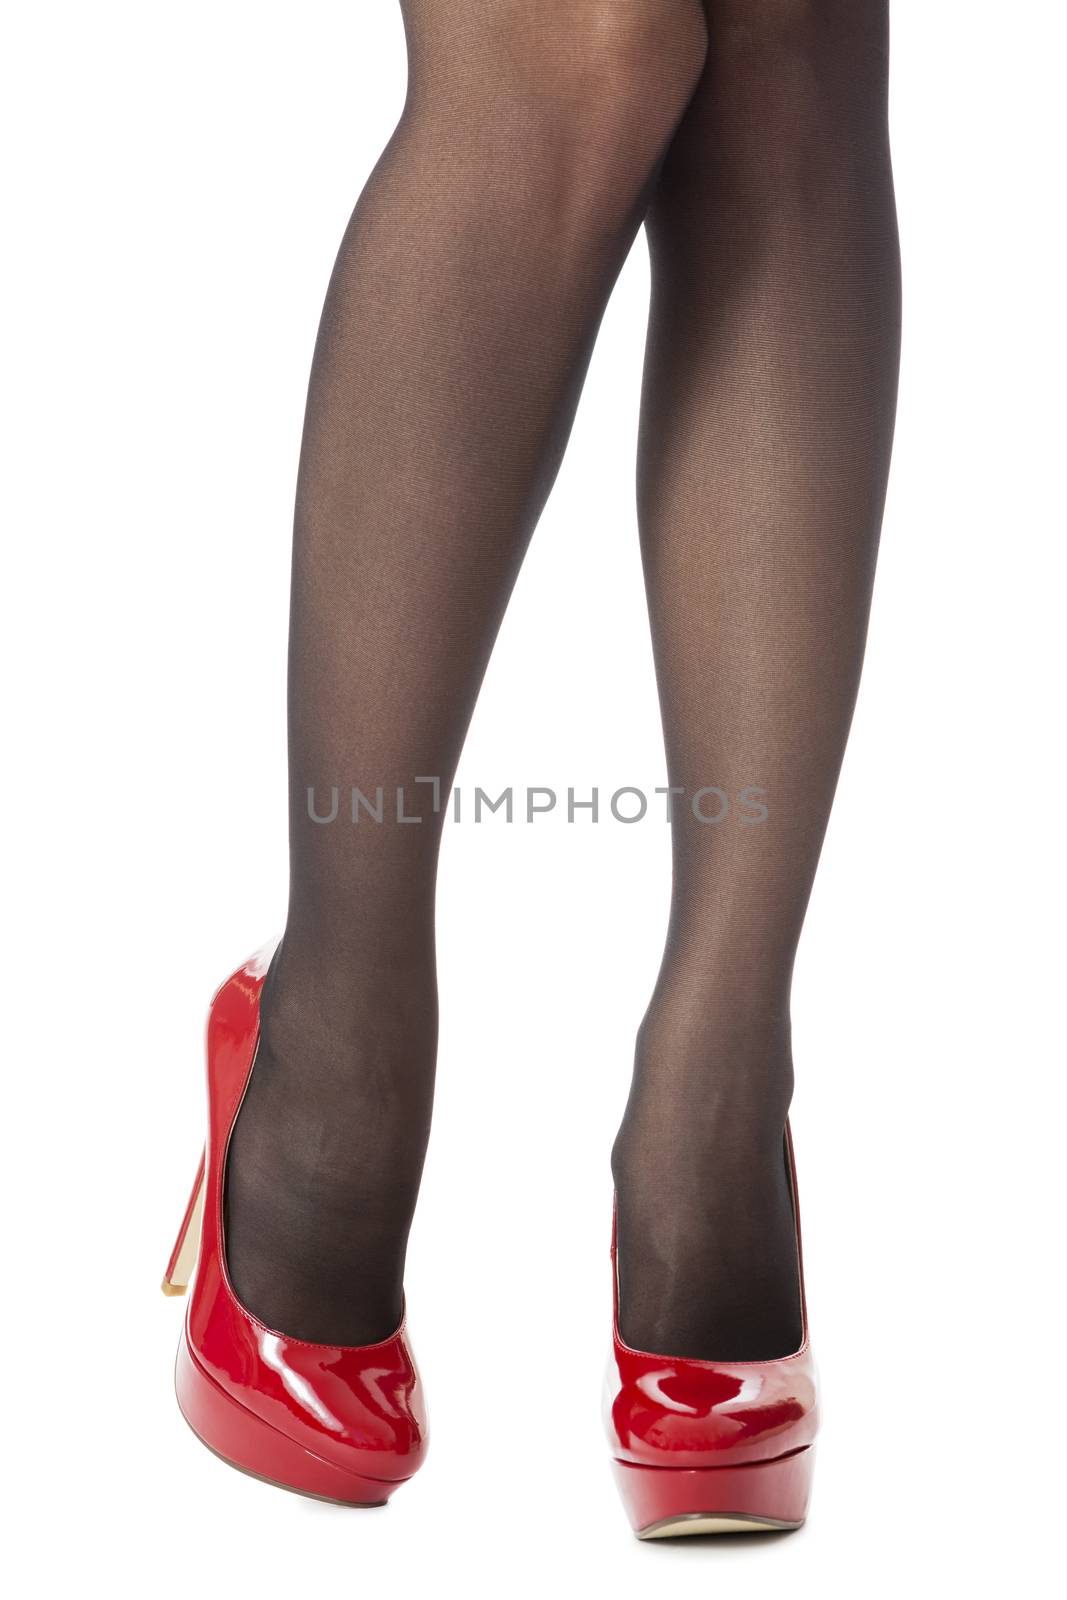 Close up Sexy Woman Legs Wearing Glossy Red High Heel Shoes and Gray Stockings. Isolated on White Background.